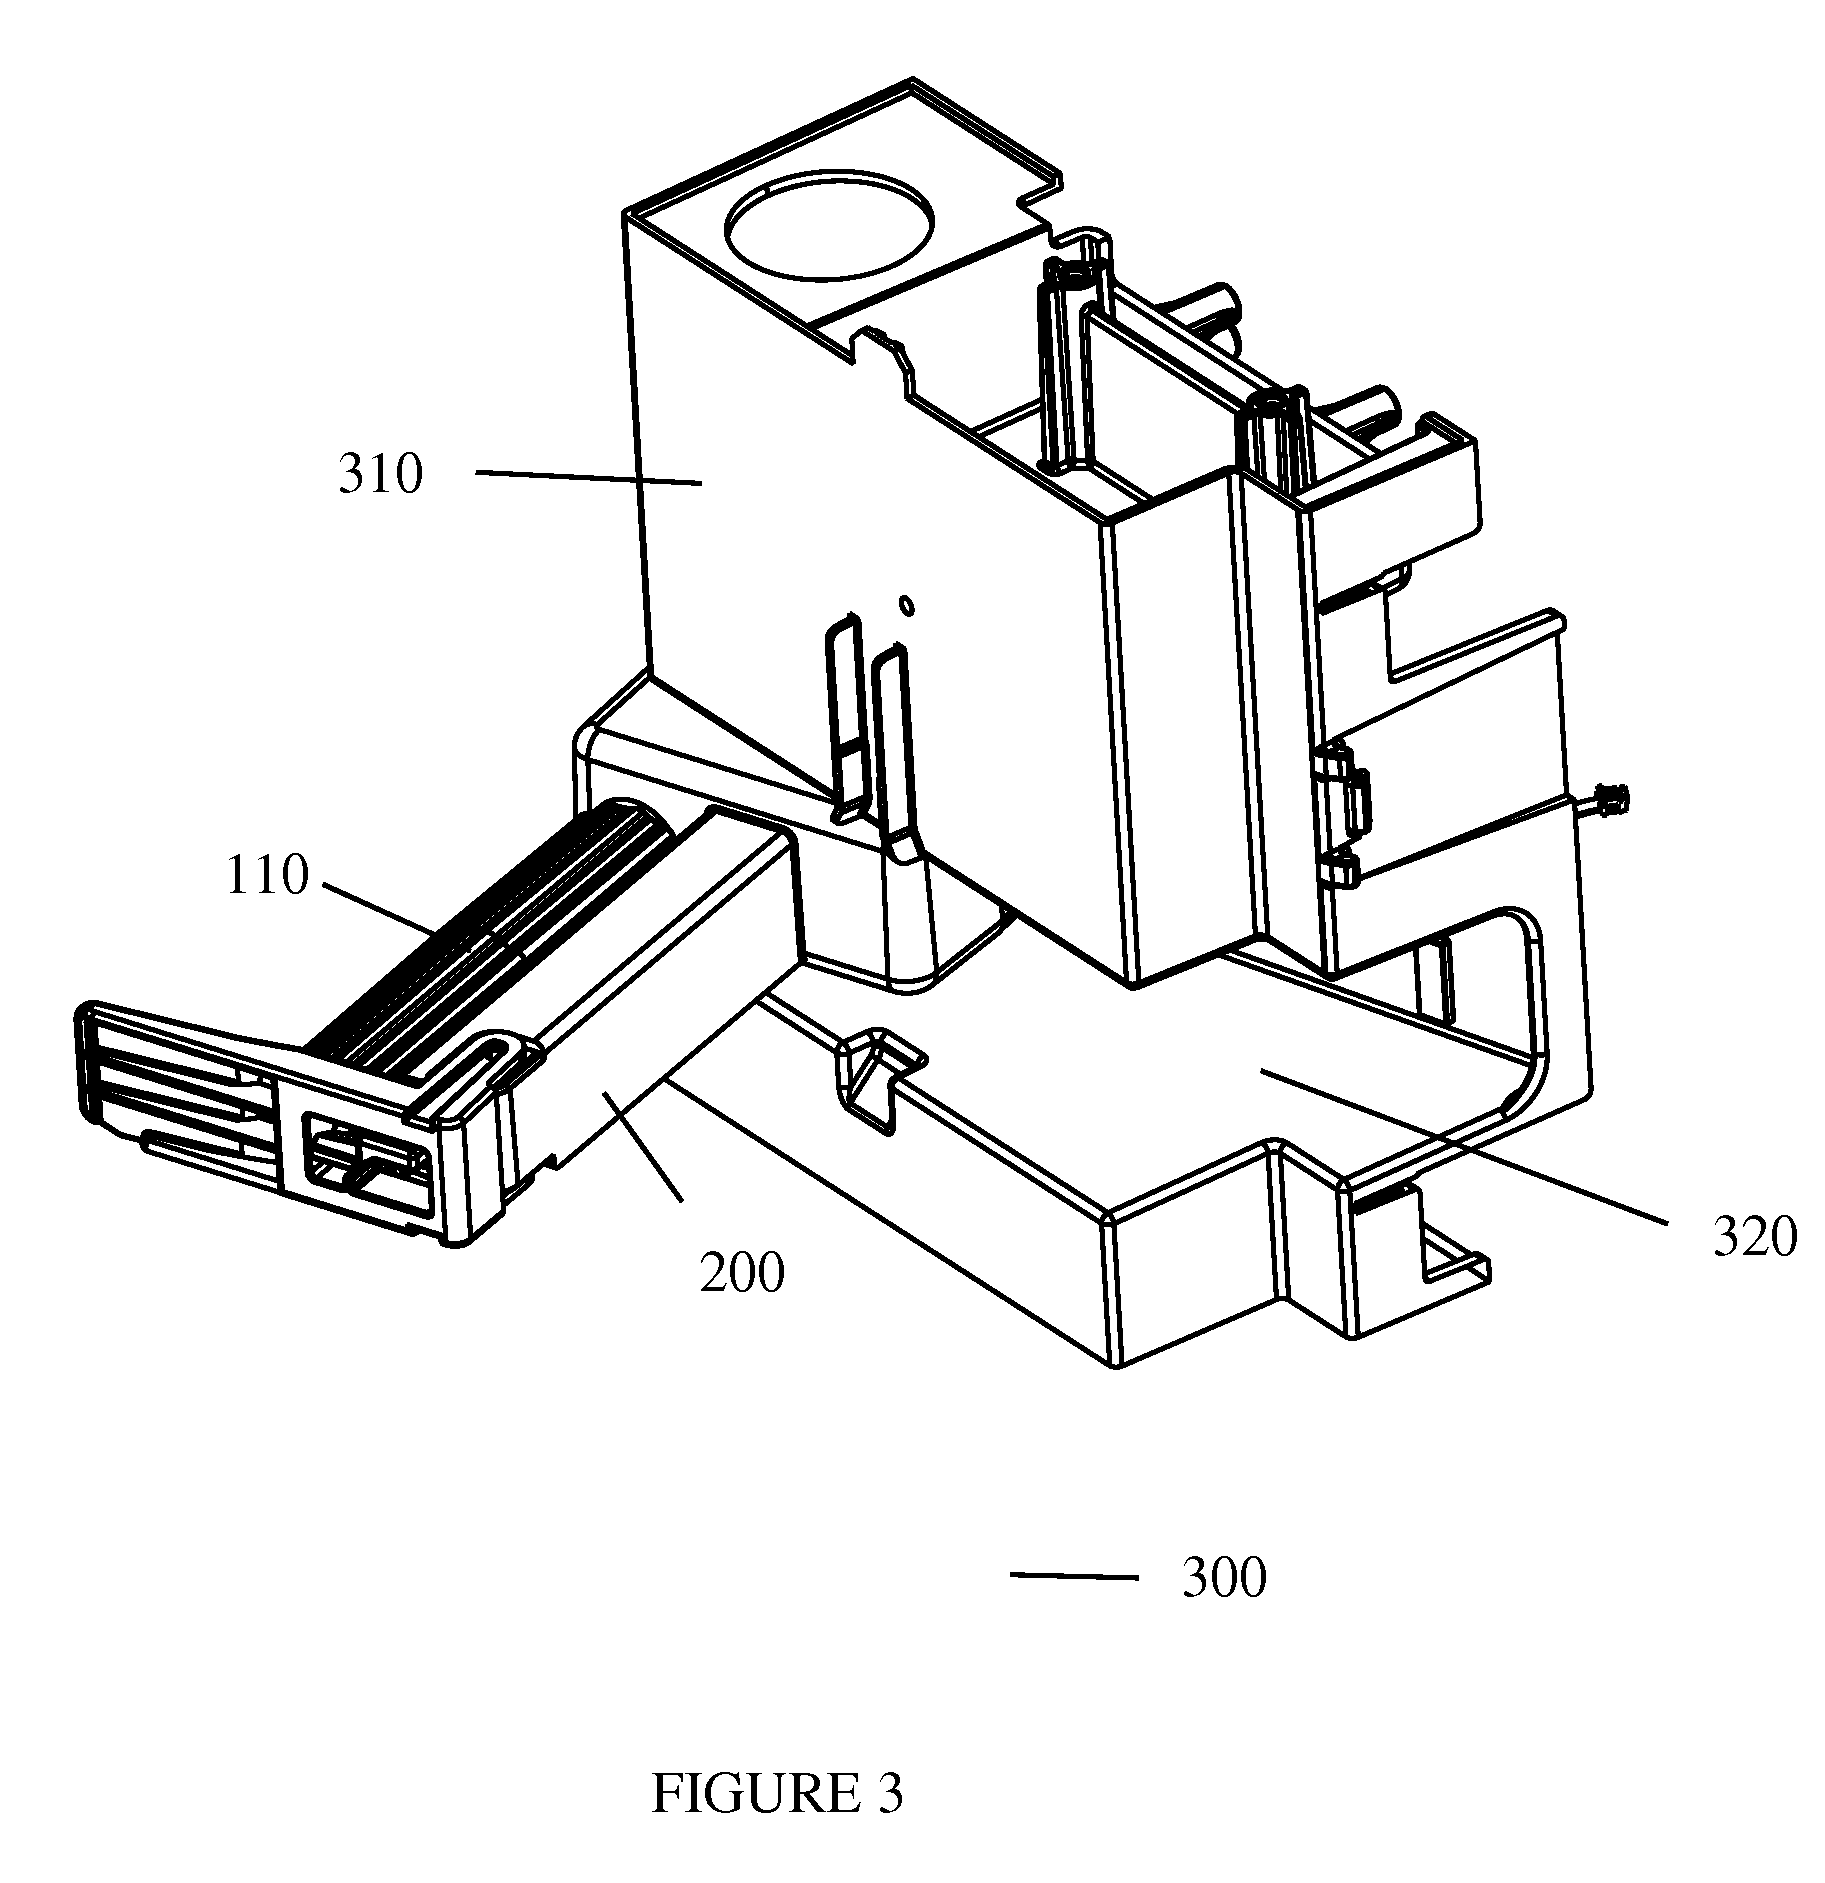 Transfer apparatus and the method of using the same in a food preparation appliance